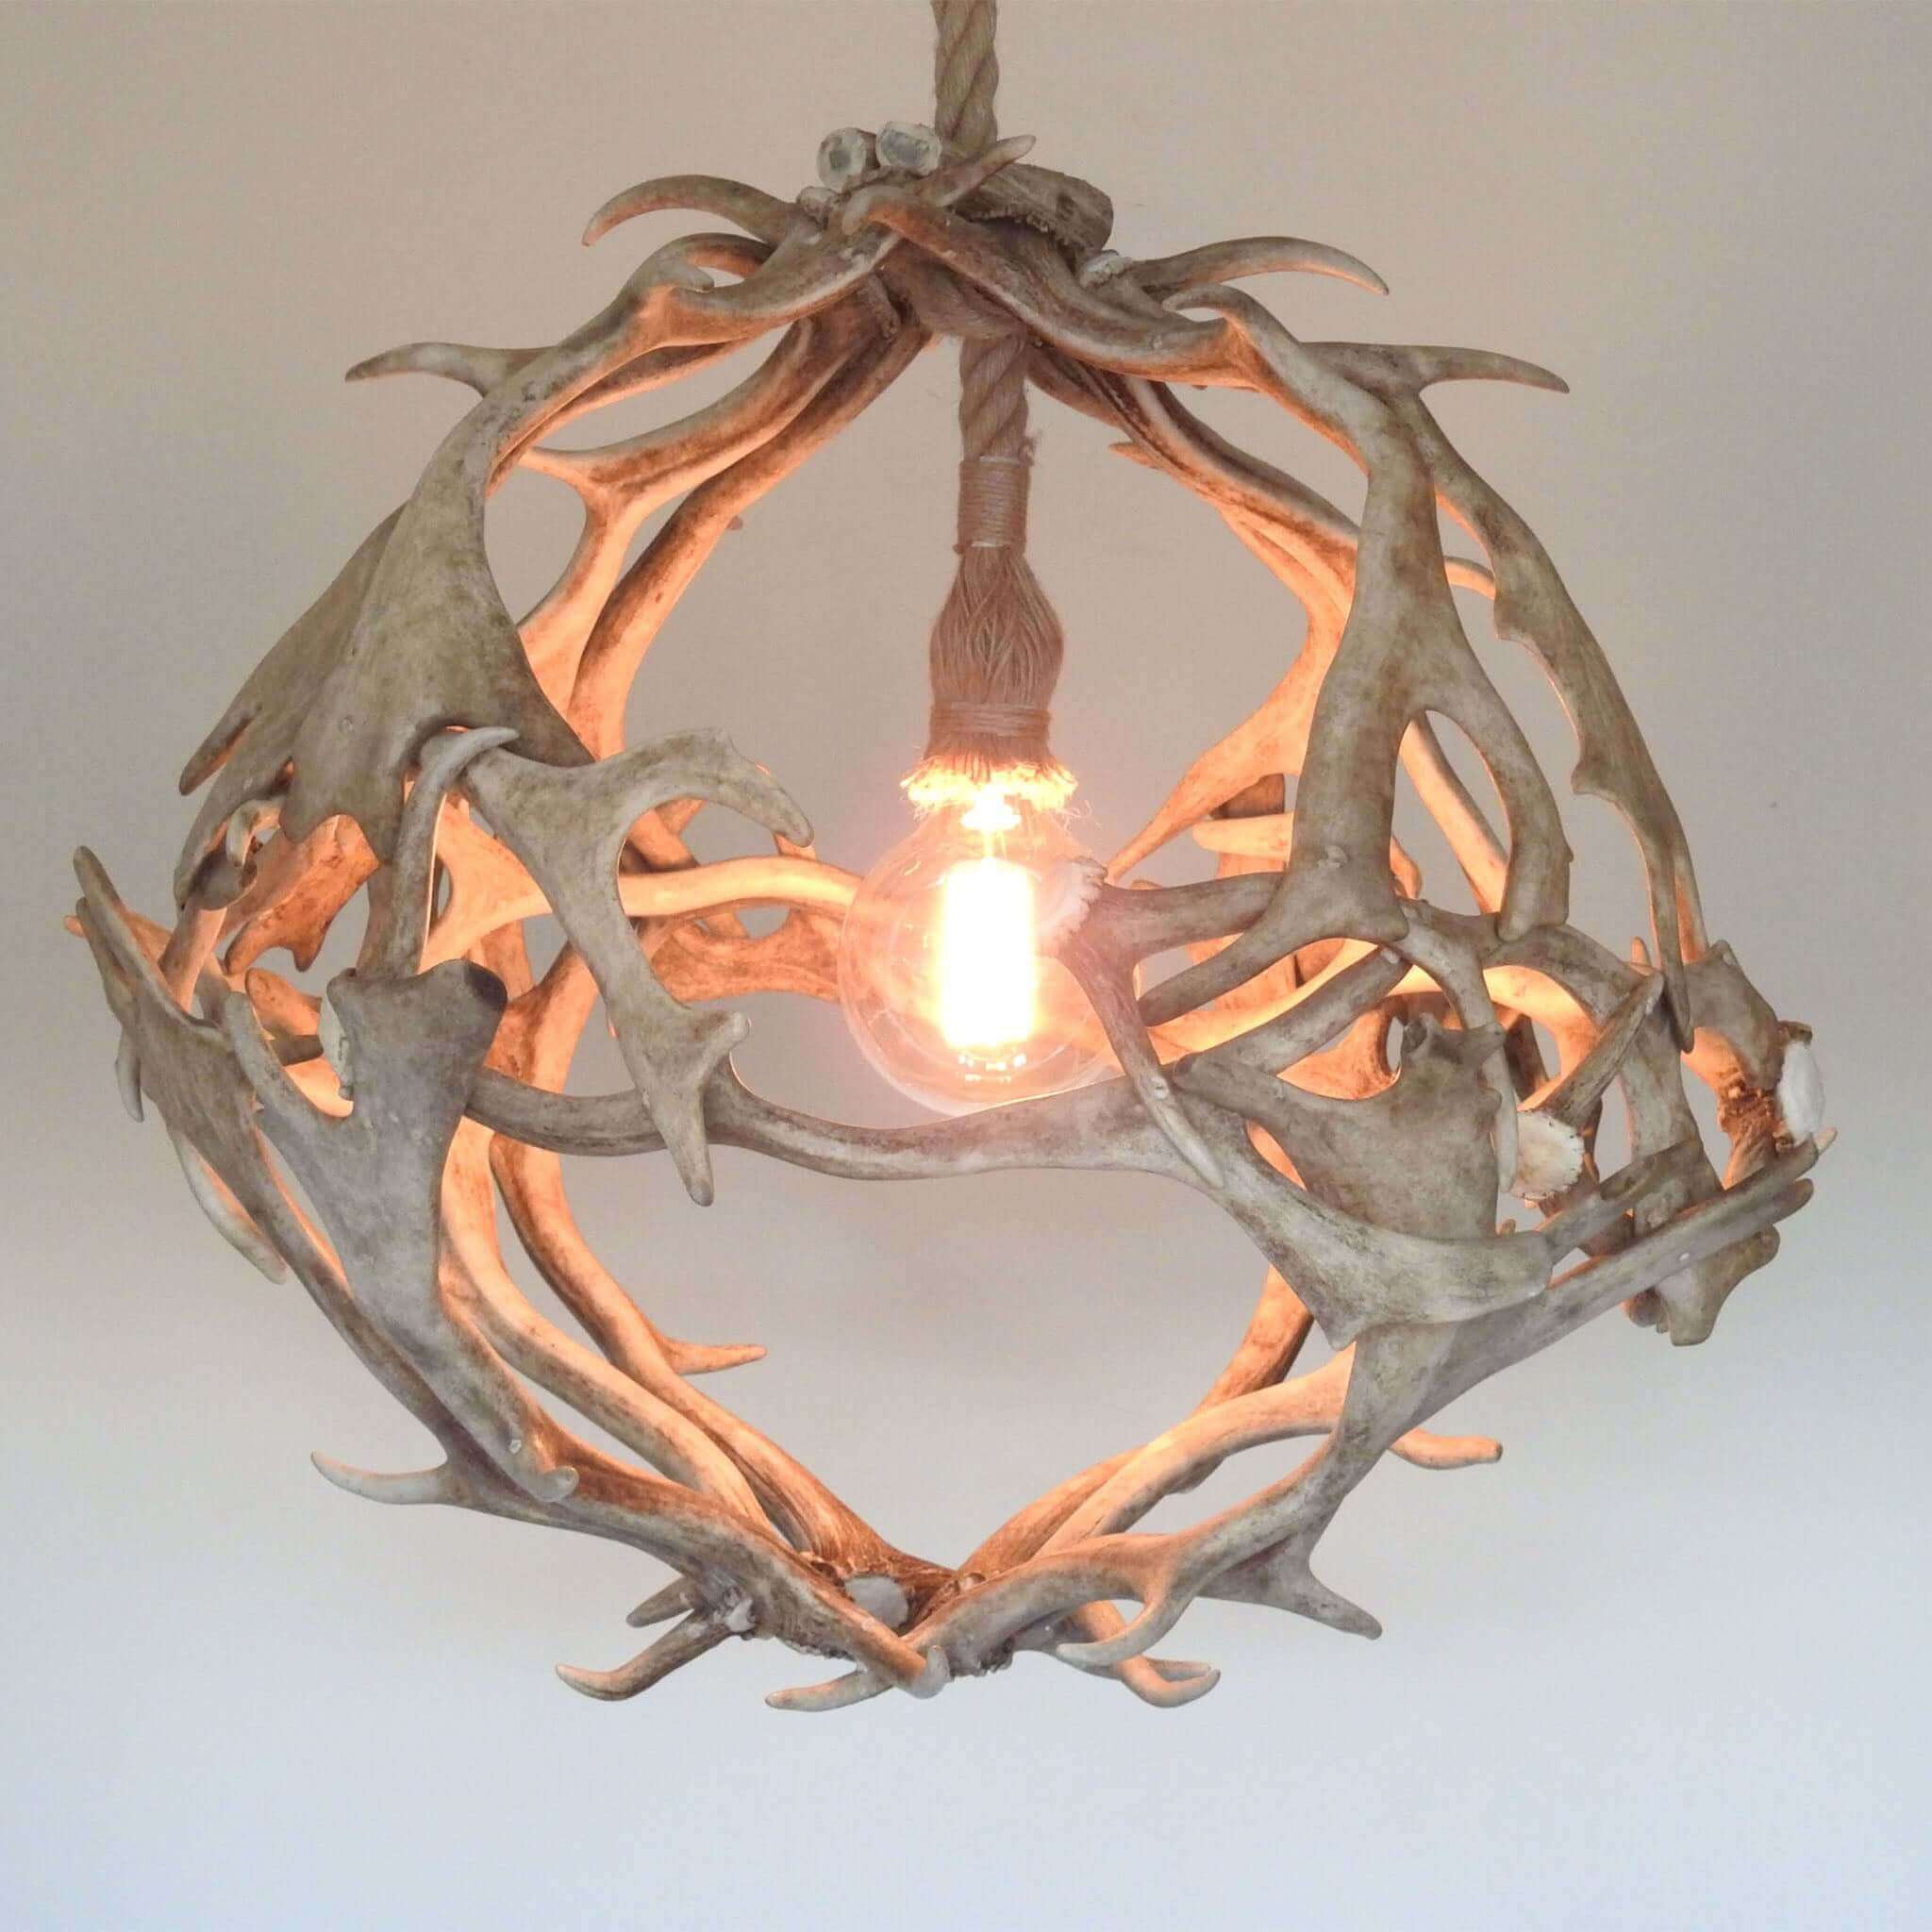 Farmhouse chandelier made of antlers.